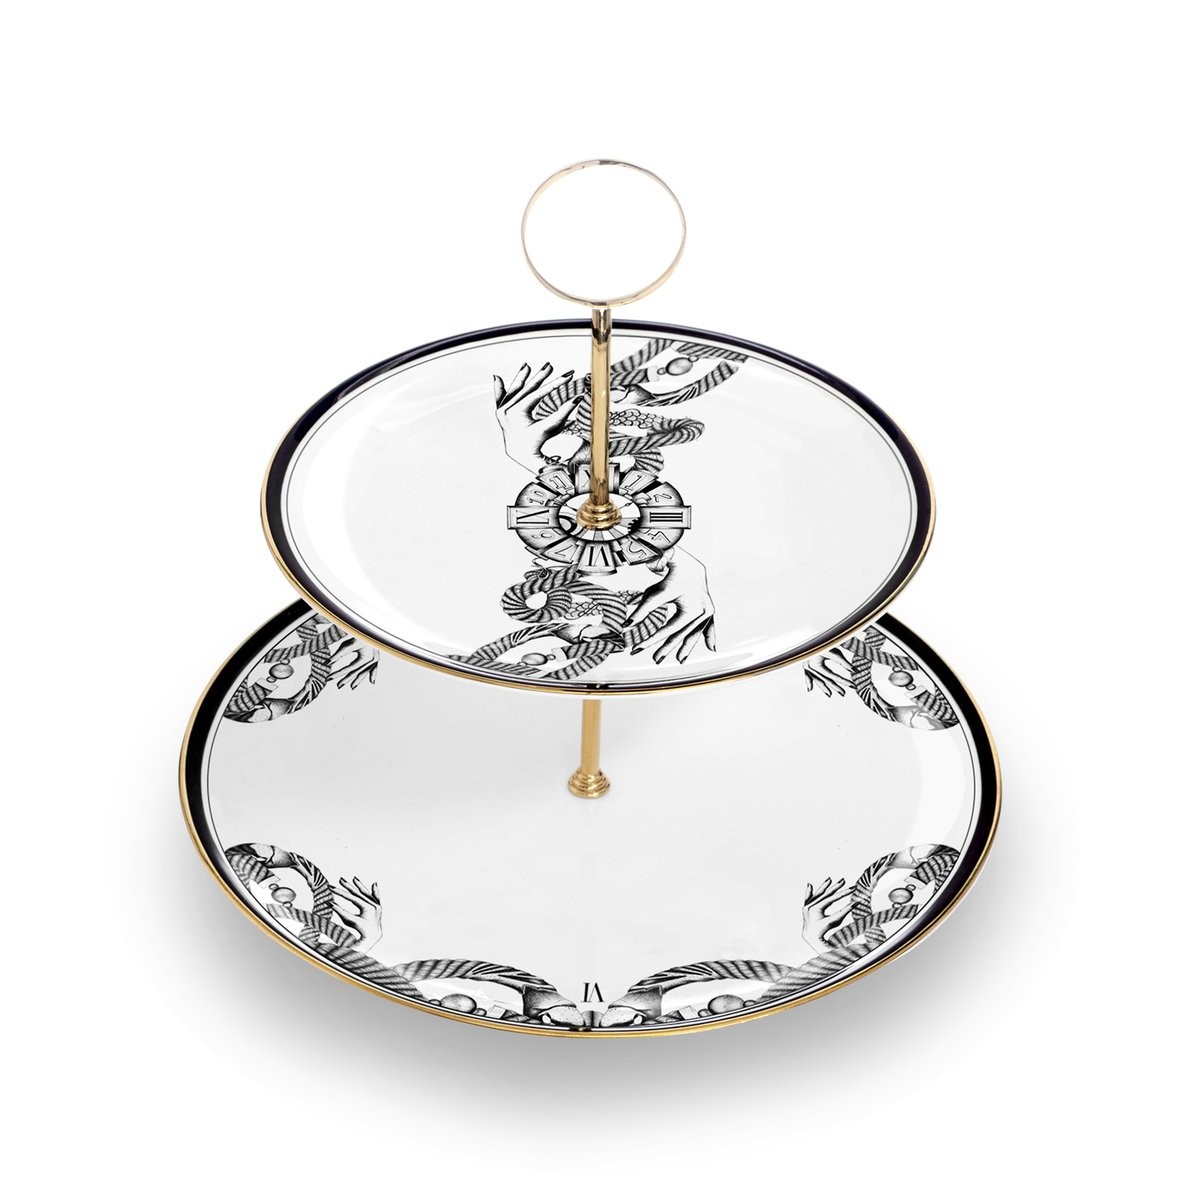 Lauren Dickinson Clarke | The Divineness of Time 2-Tier Cake Stand